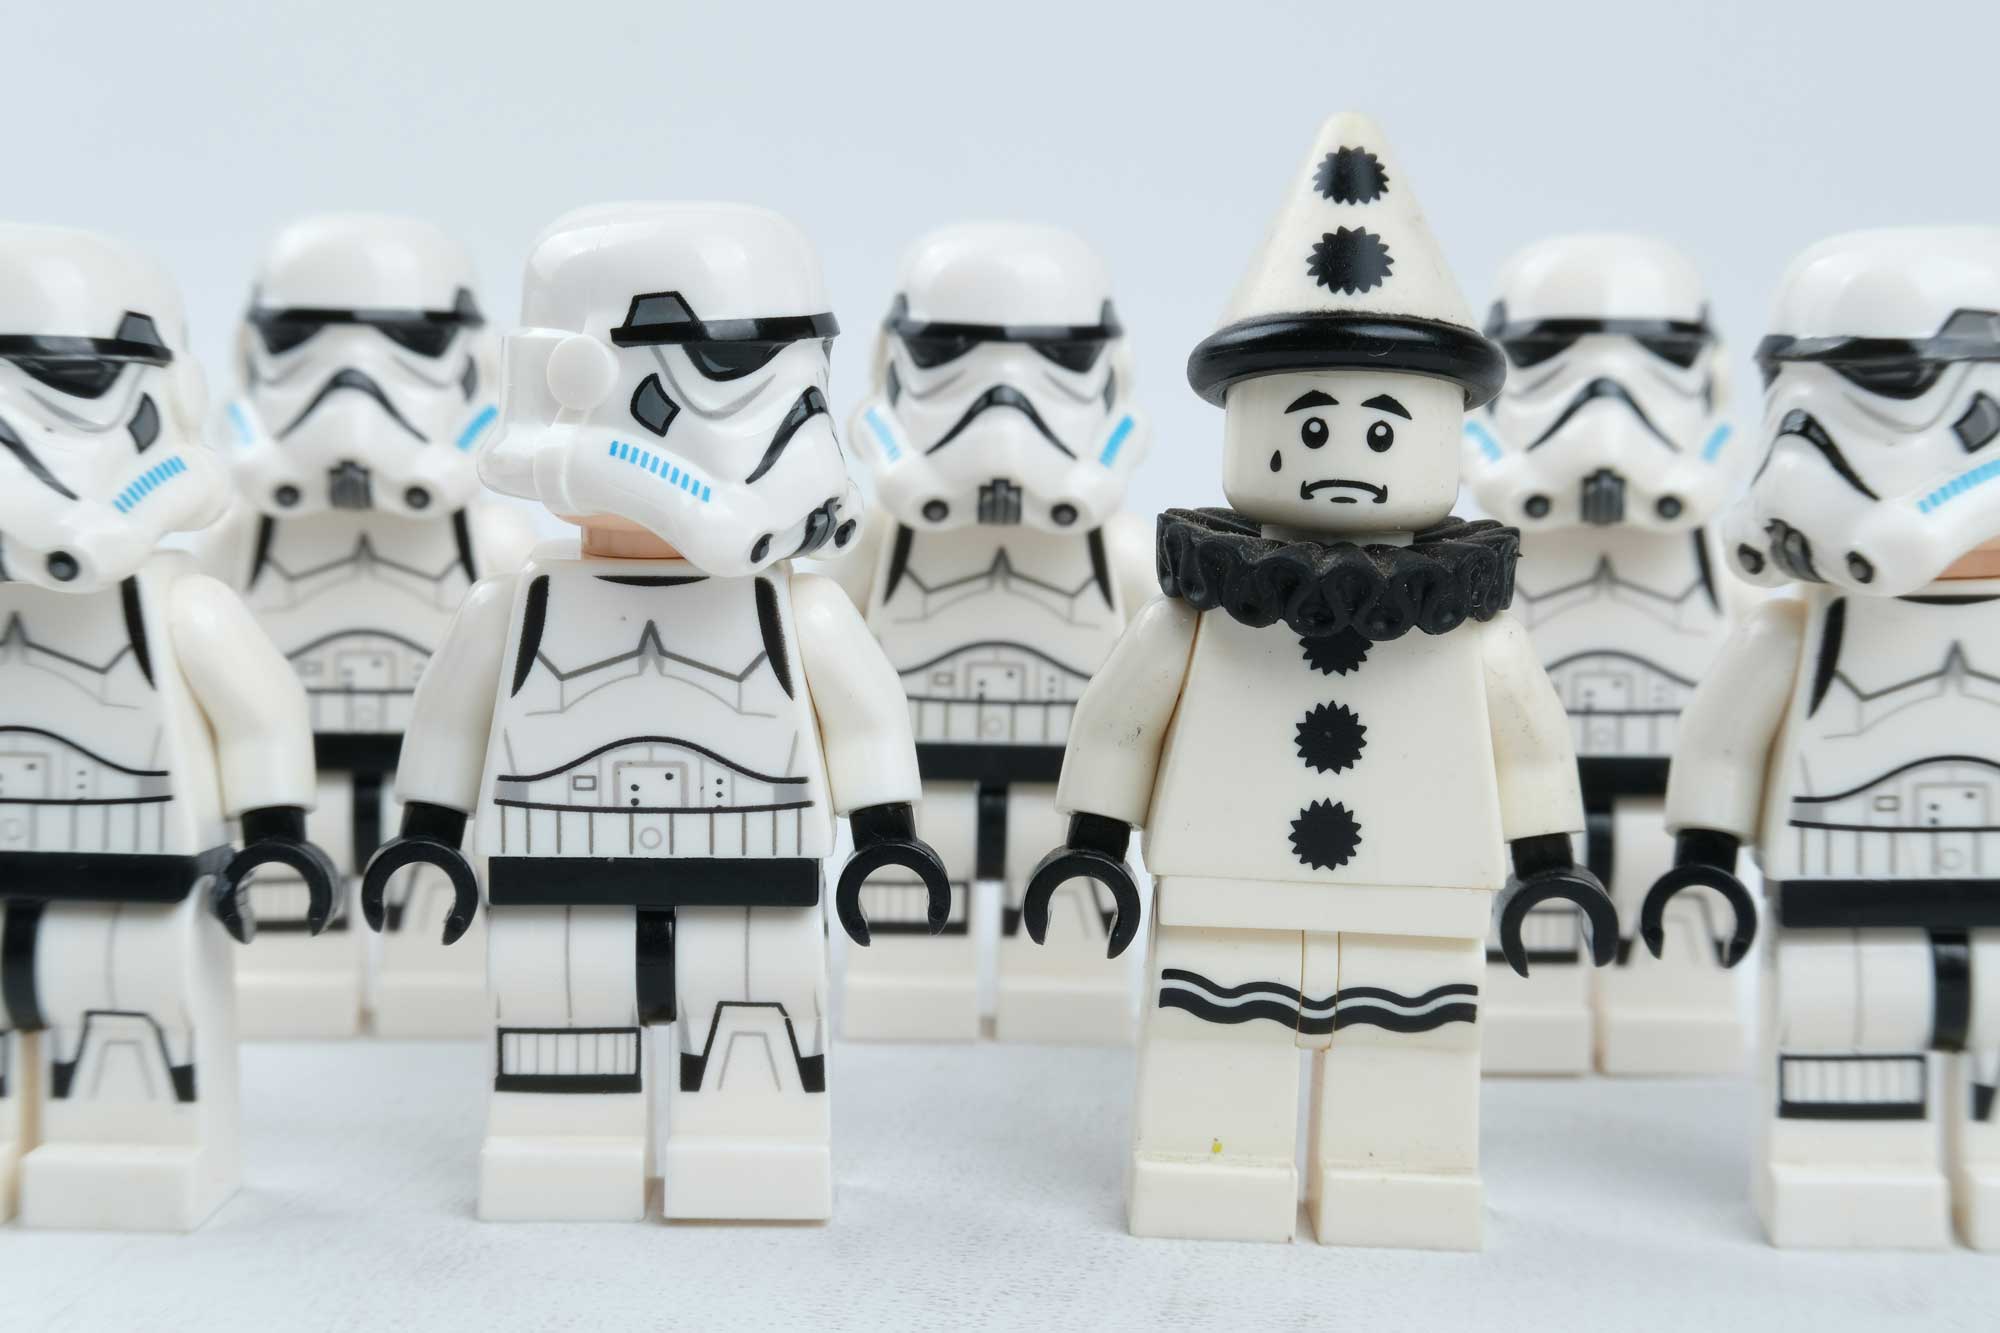 A collection of LEGO storm troopers surrounding a clown. A depiction of success in a saturated market